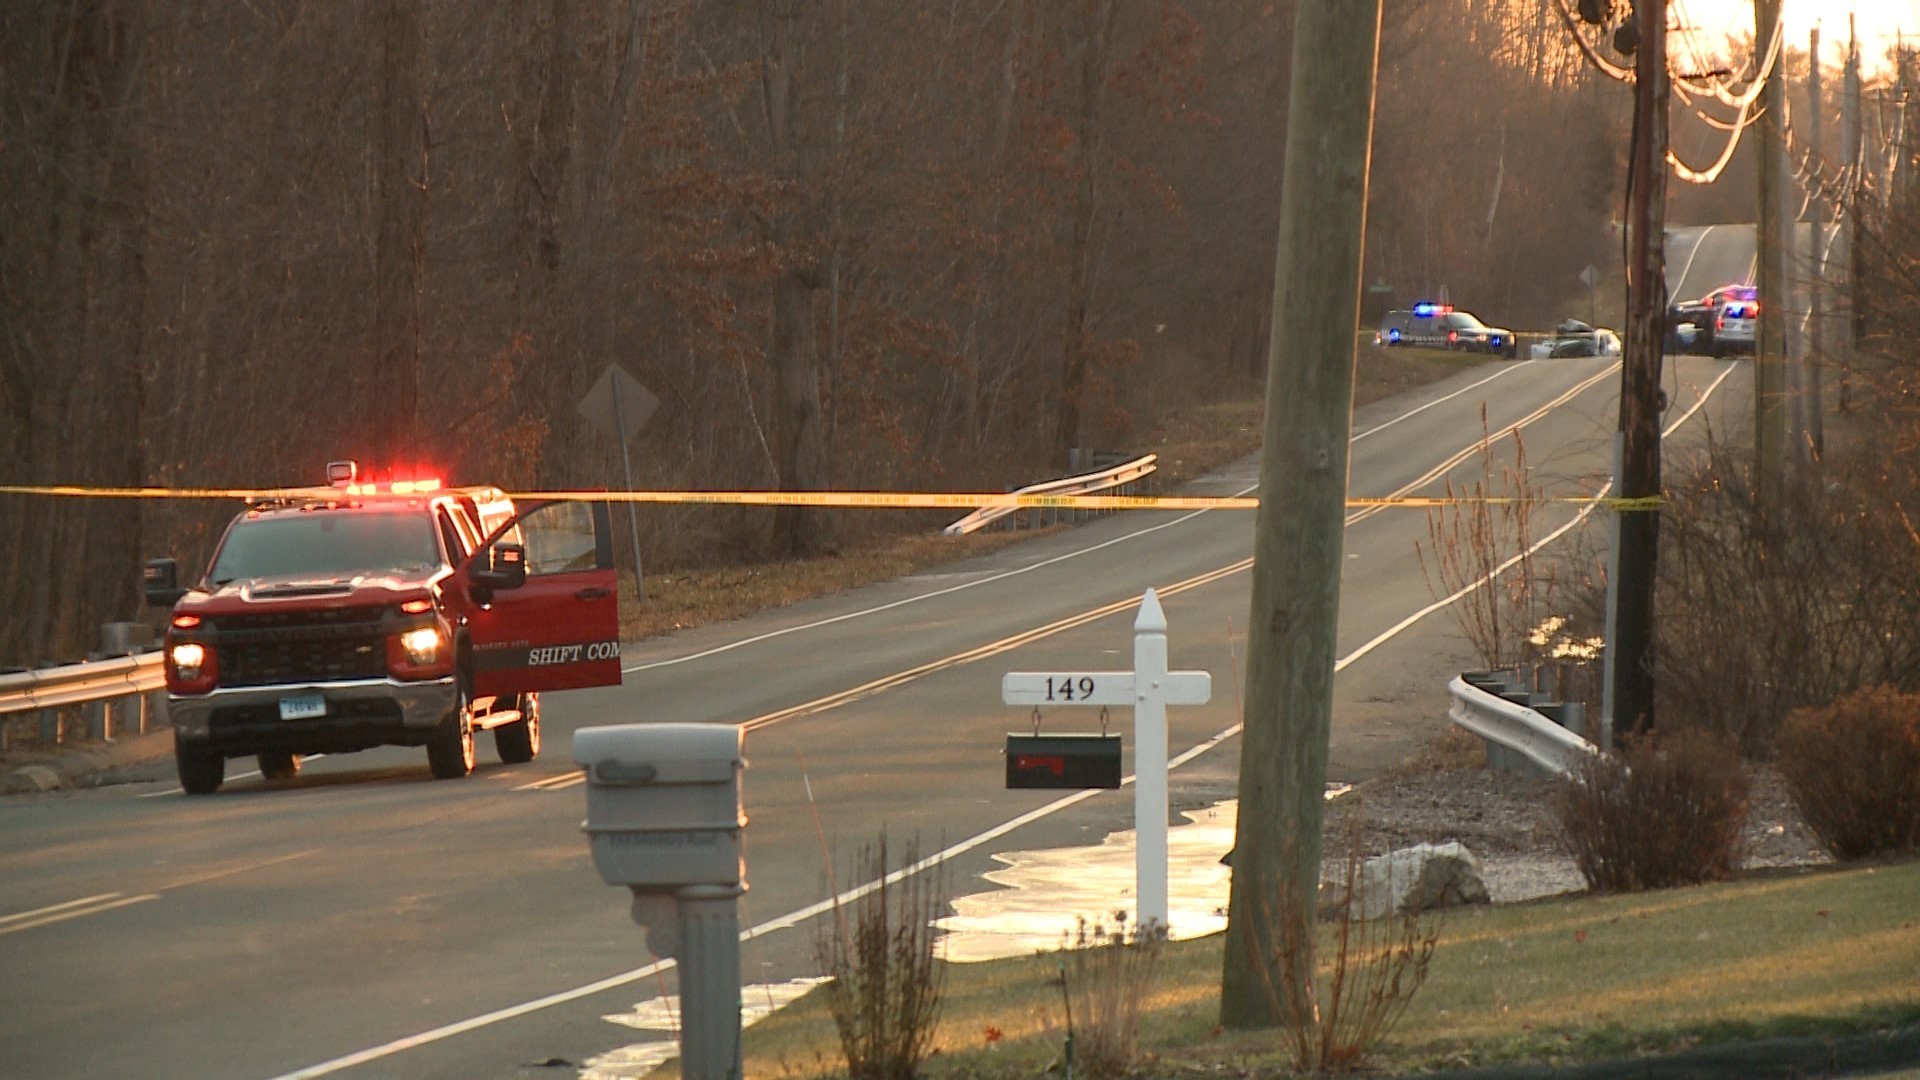 A two-car collision left three people dead in West Hartford on Christmas Day, police said. One of the victims was a 17-year-old student from Canton High School